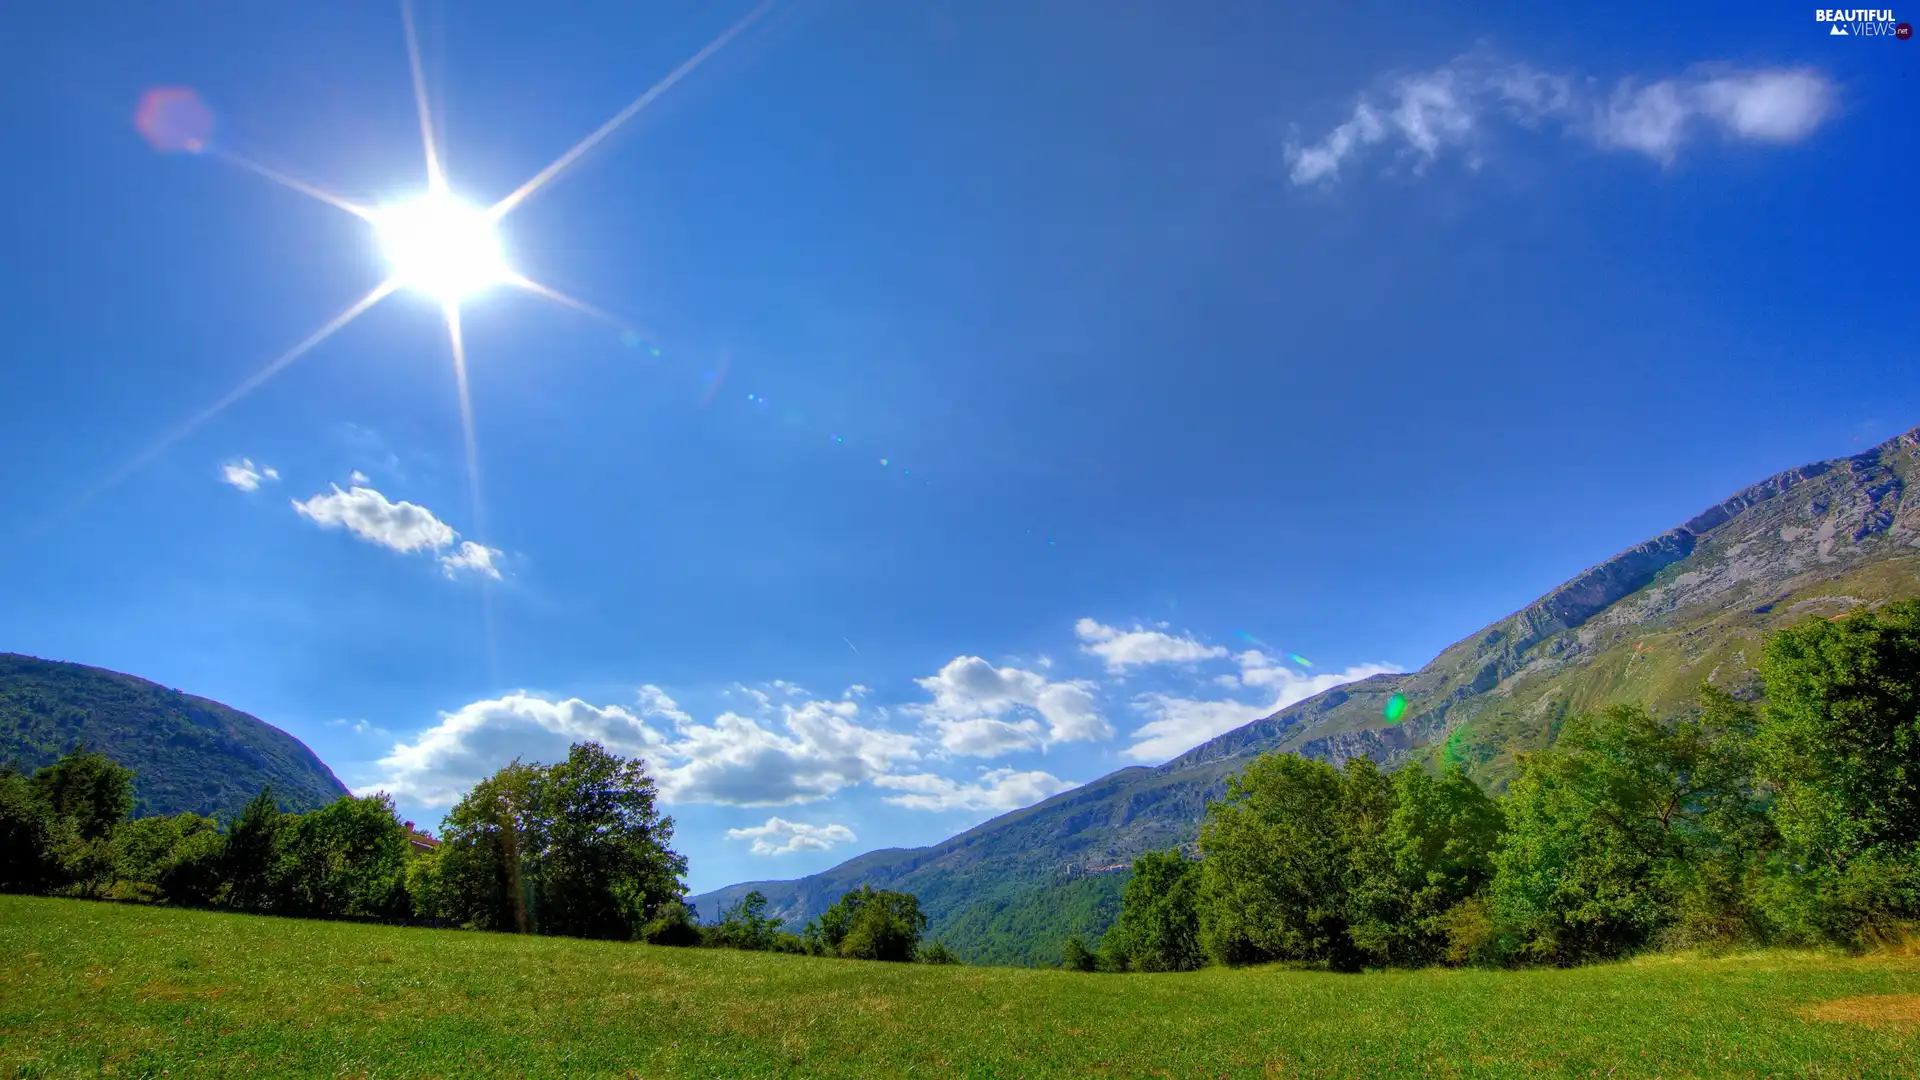 viewes, sun, Meadow, trees, Mountains